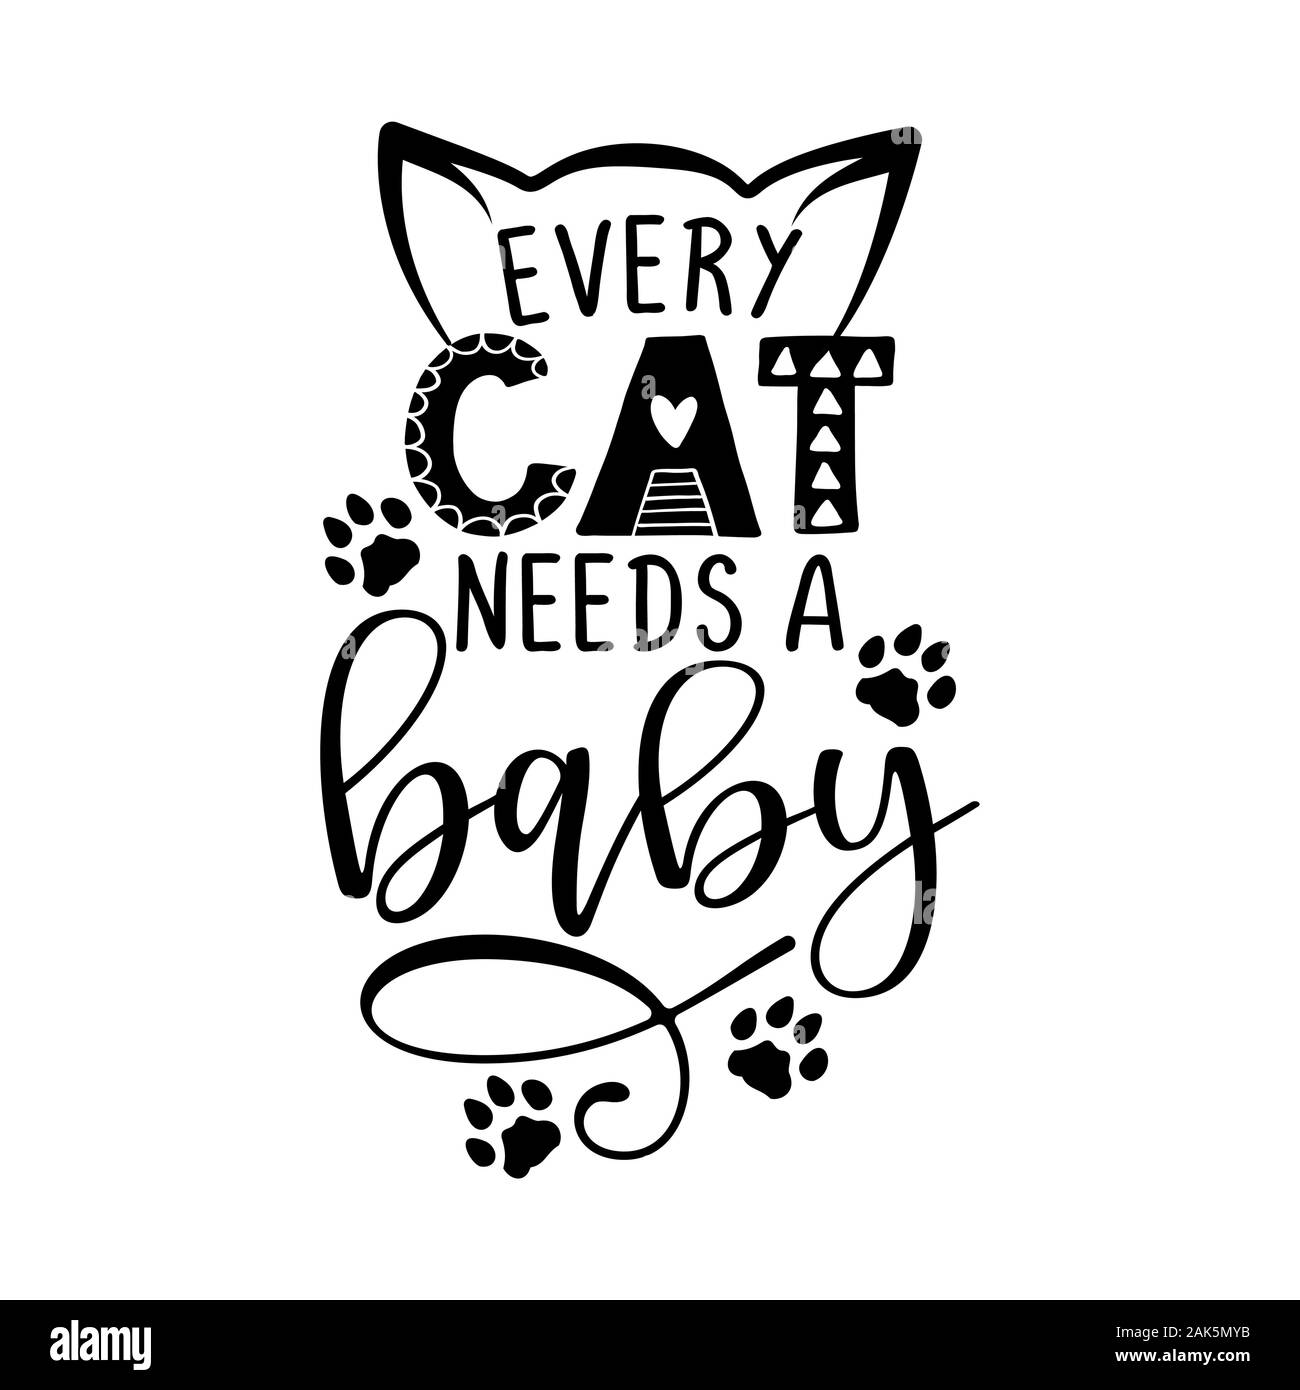 Every cat needs a baby - funny hand drawn vector saying with dog paws. Cute saying for babys, fathers or dogs. Hand drawn lettering quote. Vector illu Stock Vector